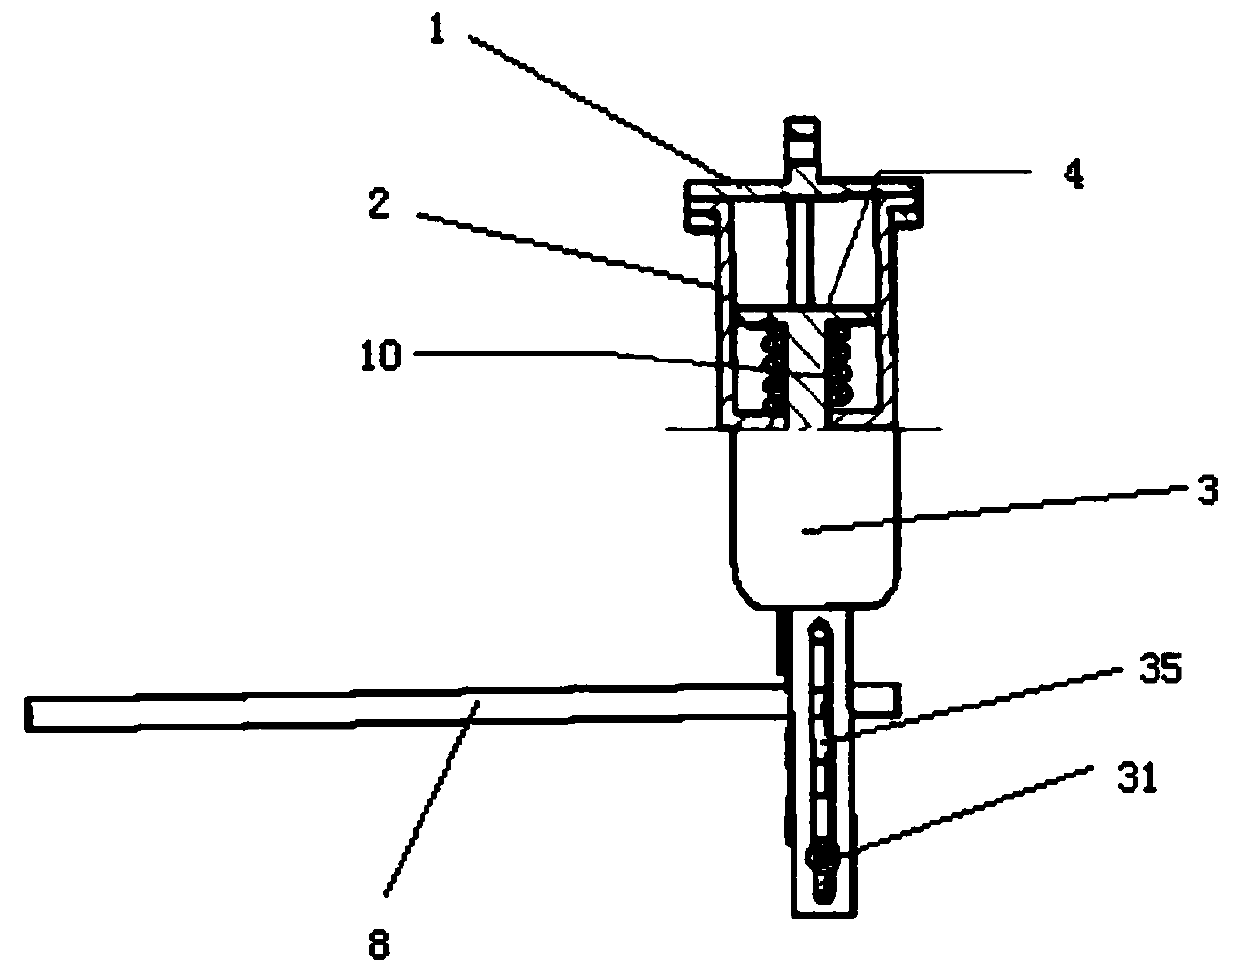 An off-line protection pole device for transmission line pole and tower structure